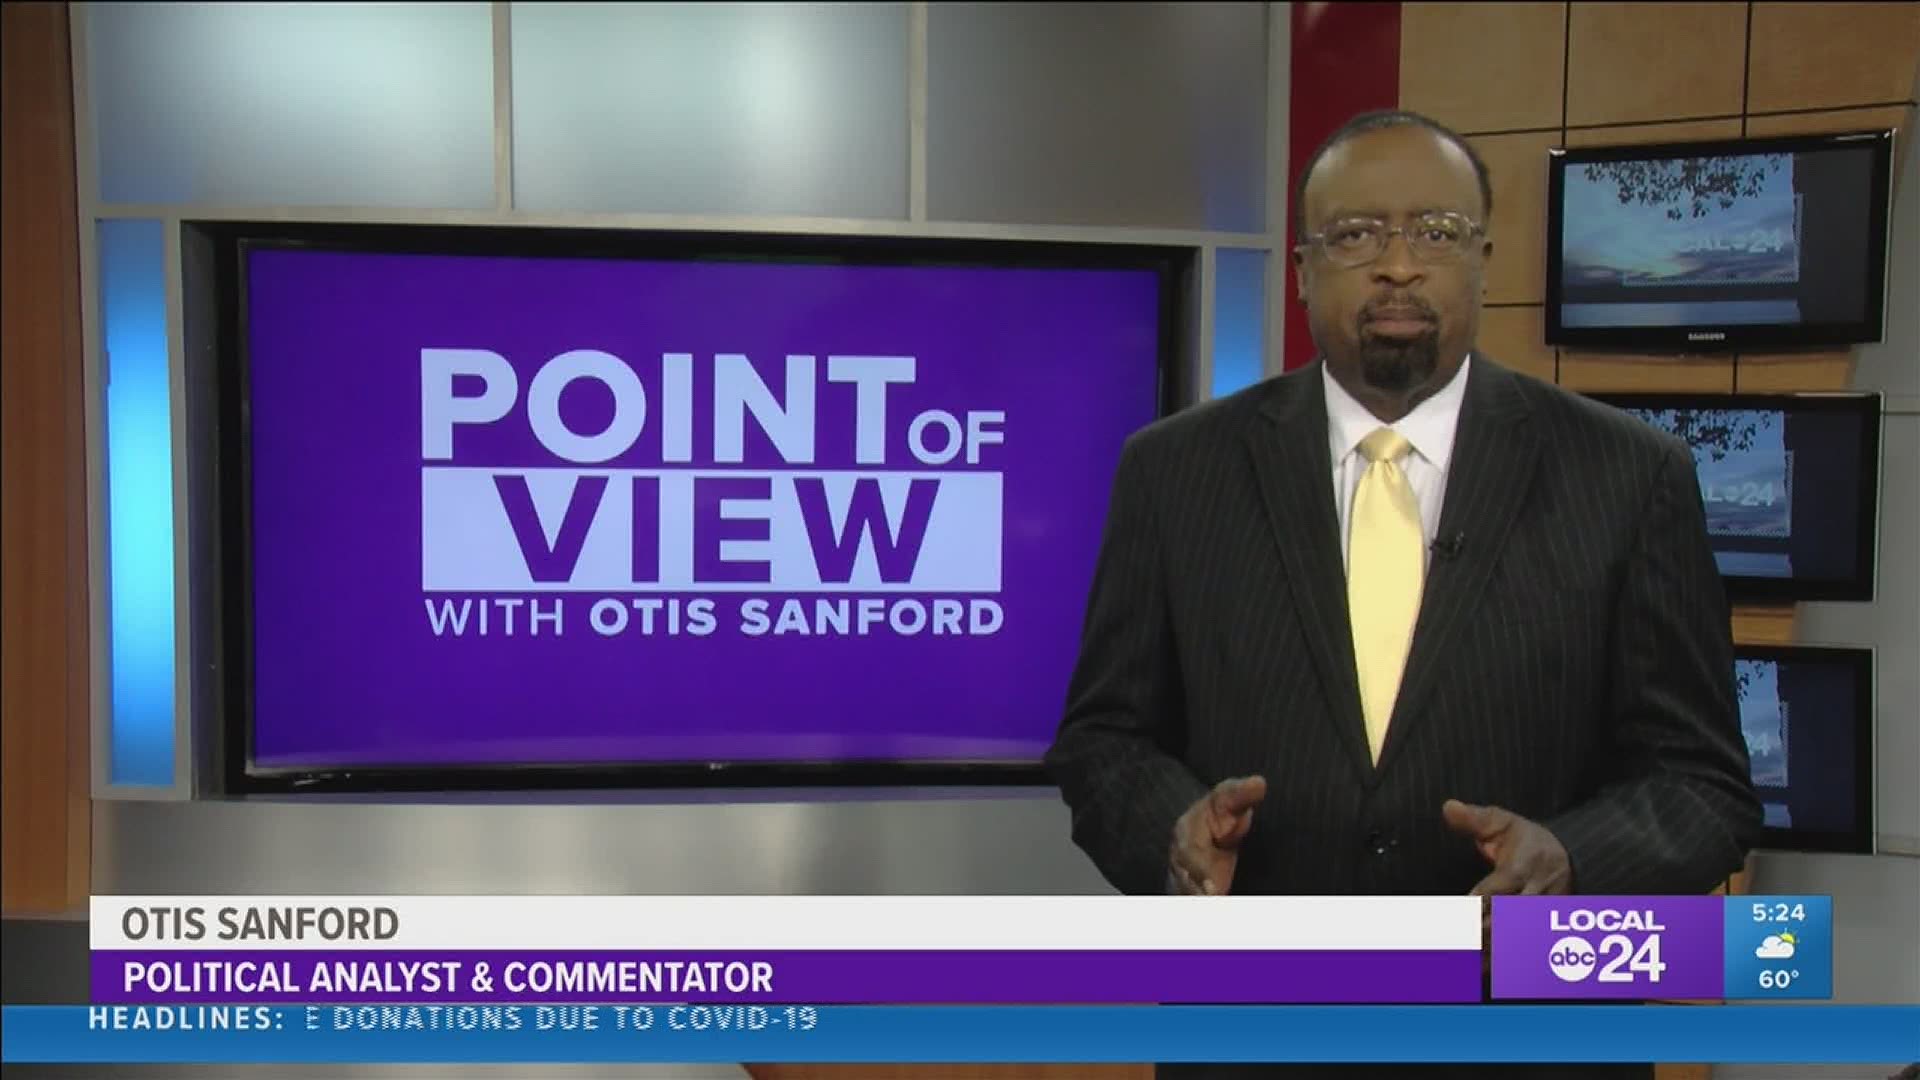 Local 24 News political analyst and commentator Otis Sanford shares his point of view on Tennessee Republicans and their support of Trump.